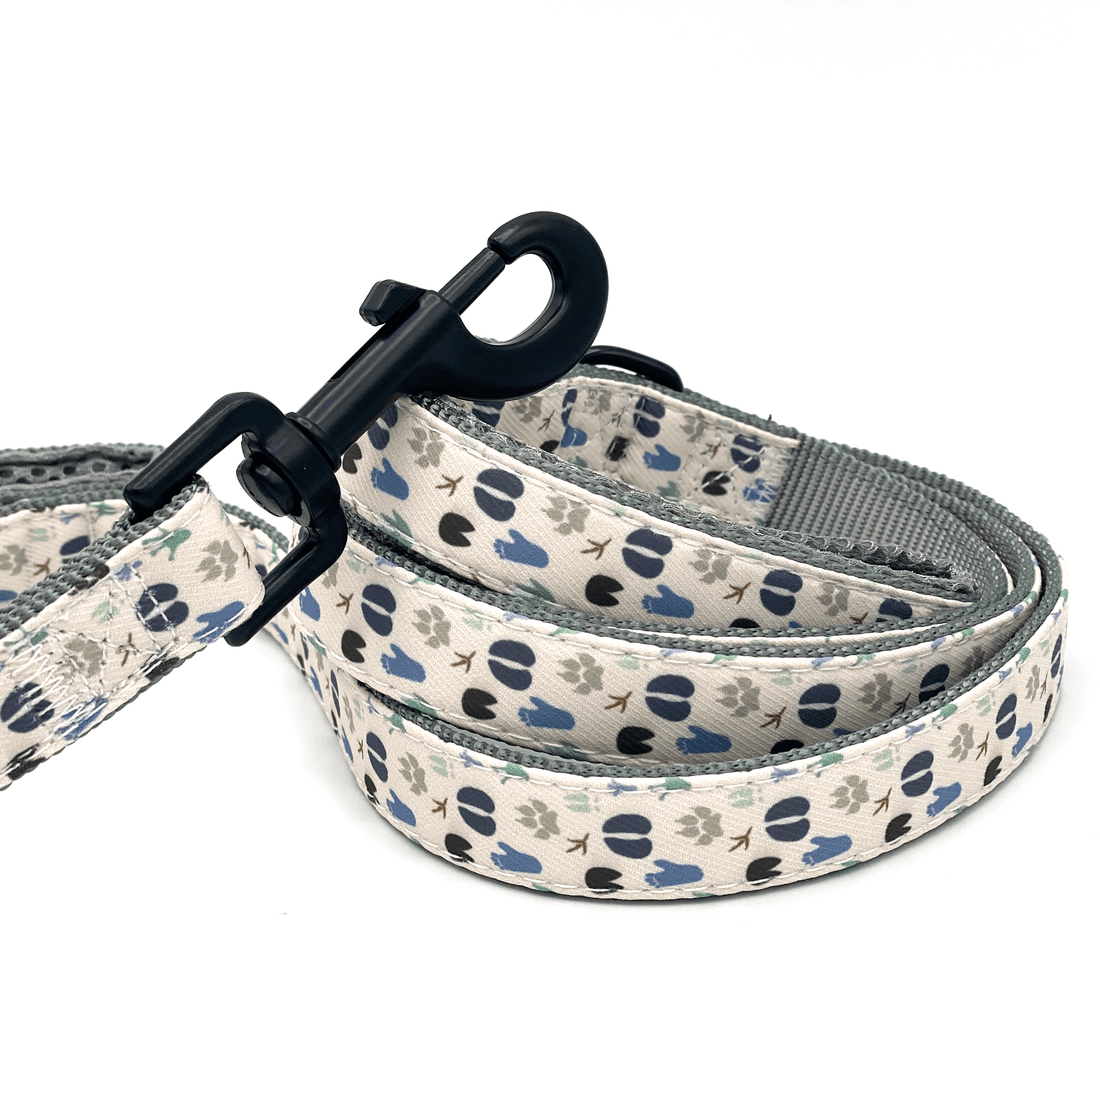 a dog leash with natural colored paw prints of varying animals